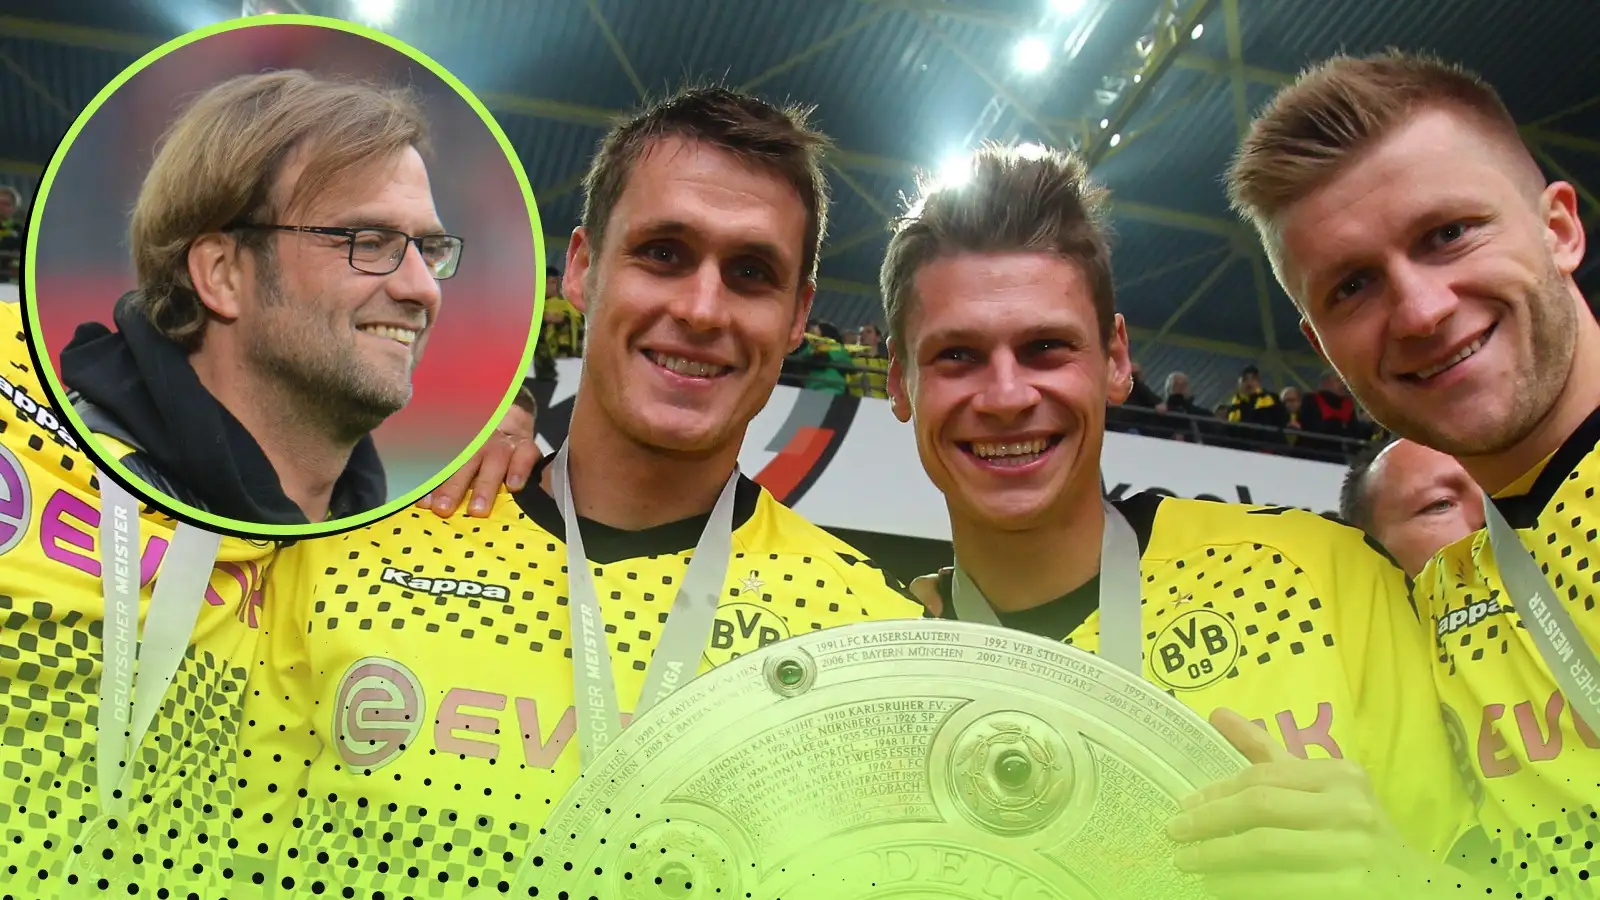 Where are they now? The Borussia Dortmund squad that won the Bundesliga in 2011-12